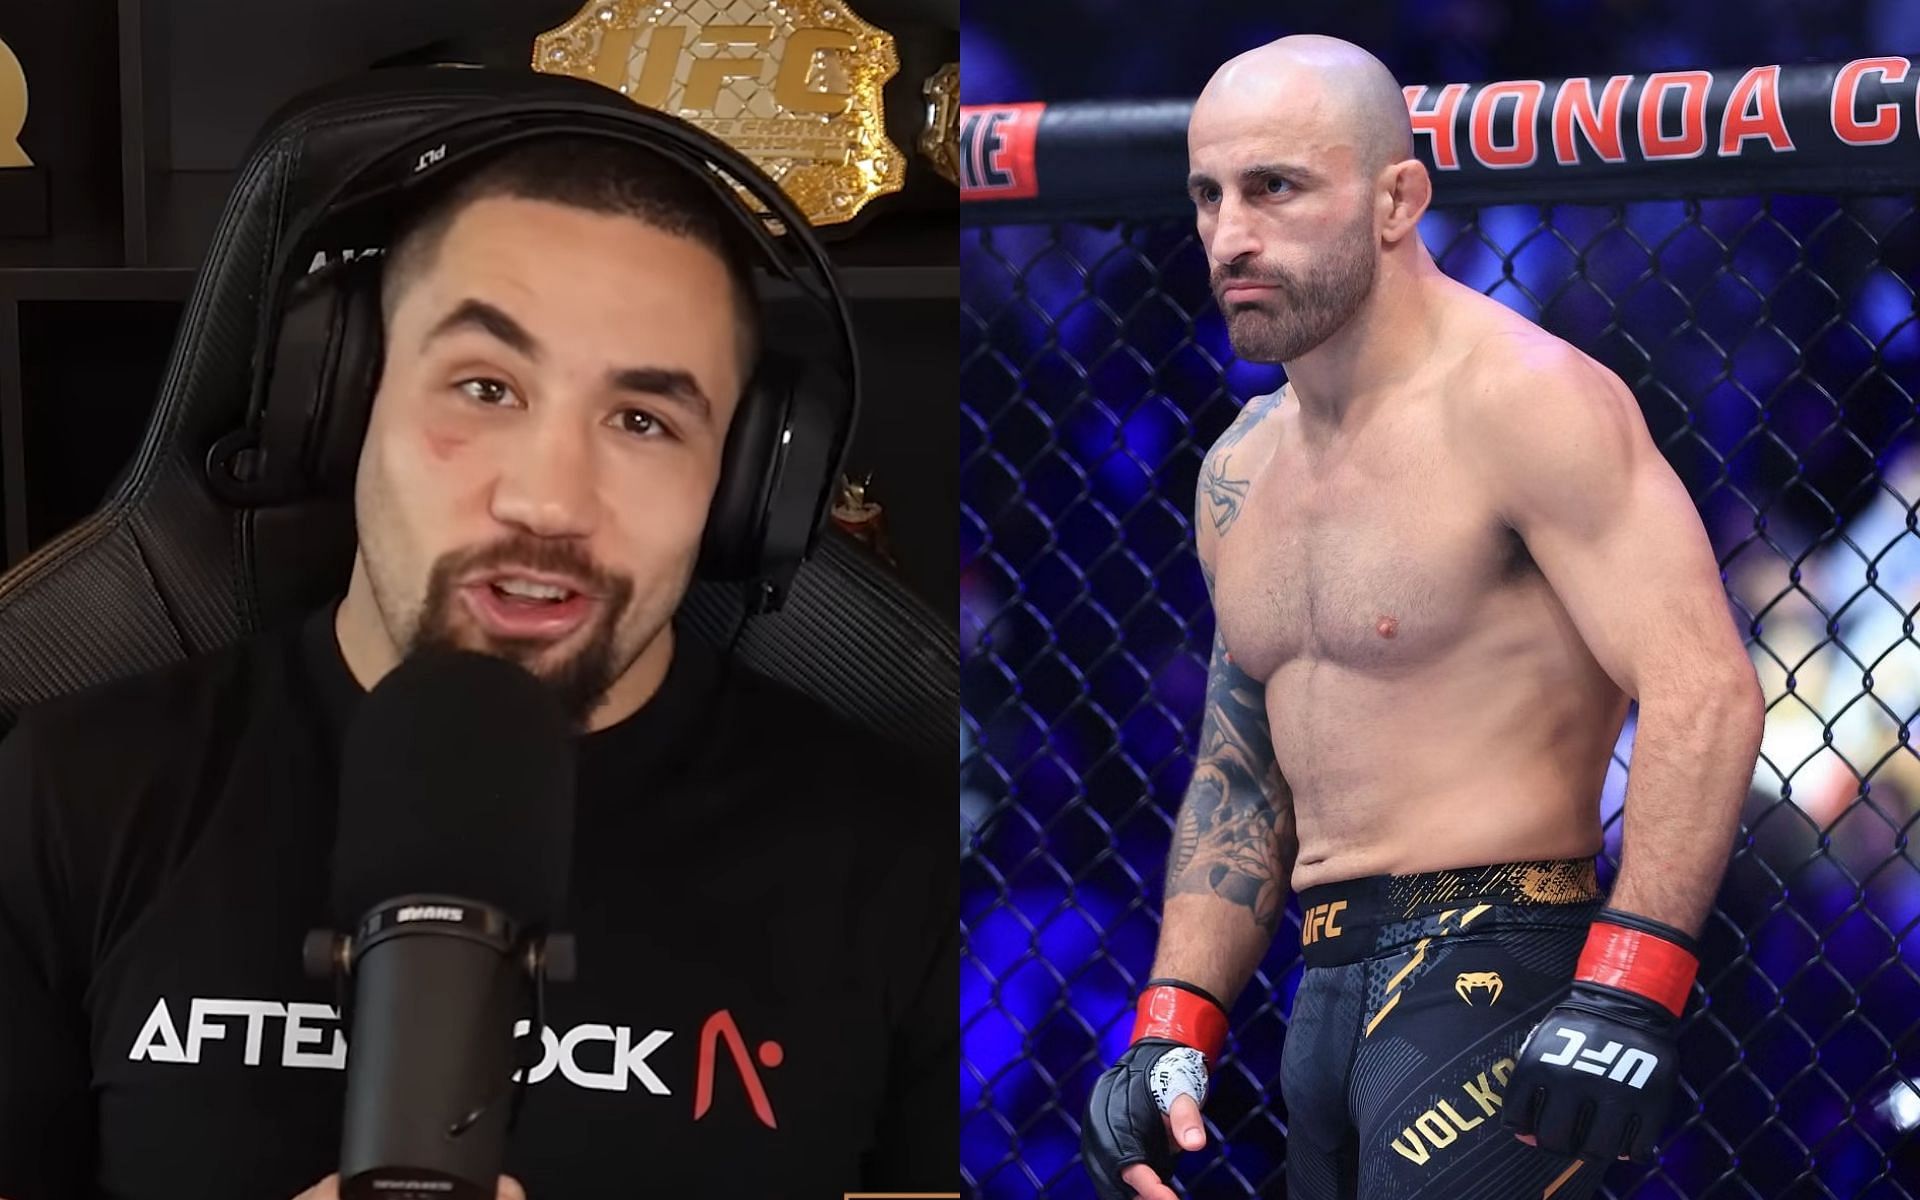 Robert Whittaker (left) explains why Alexander Volkanovski (right) may not be able to take too long of a break following KO loss [Images Courtesy: @GettyImages and @MMArcadepodcast on YouTube]